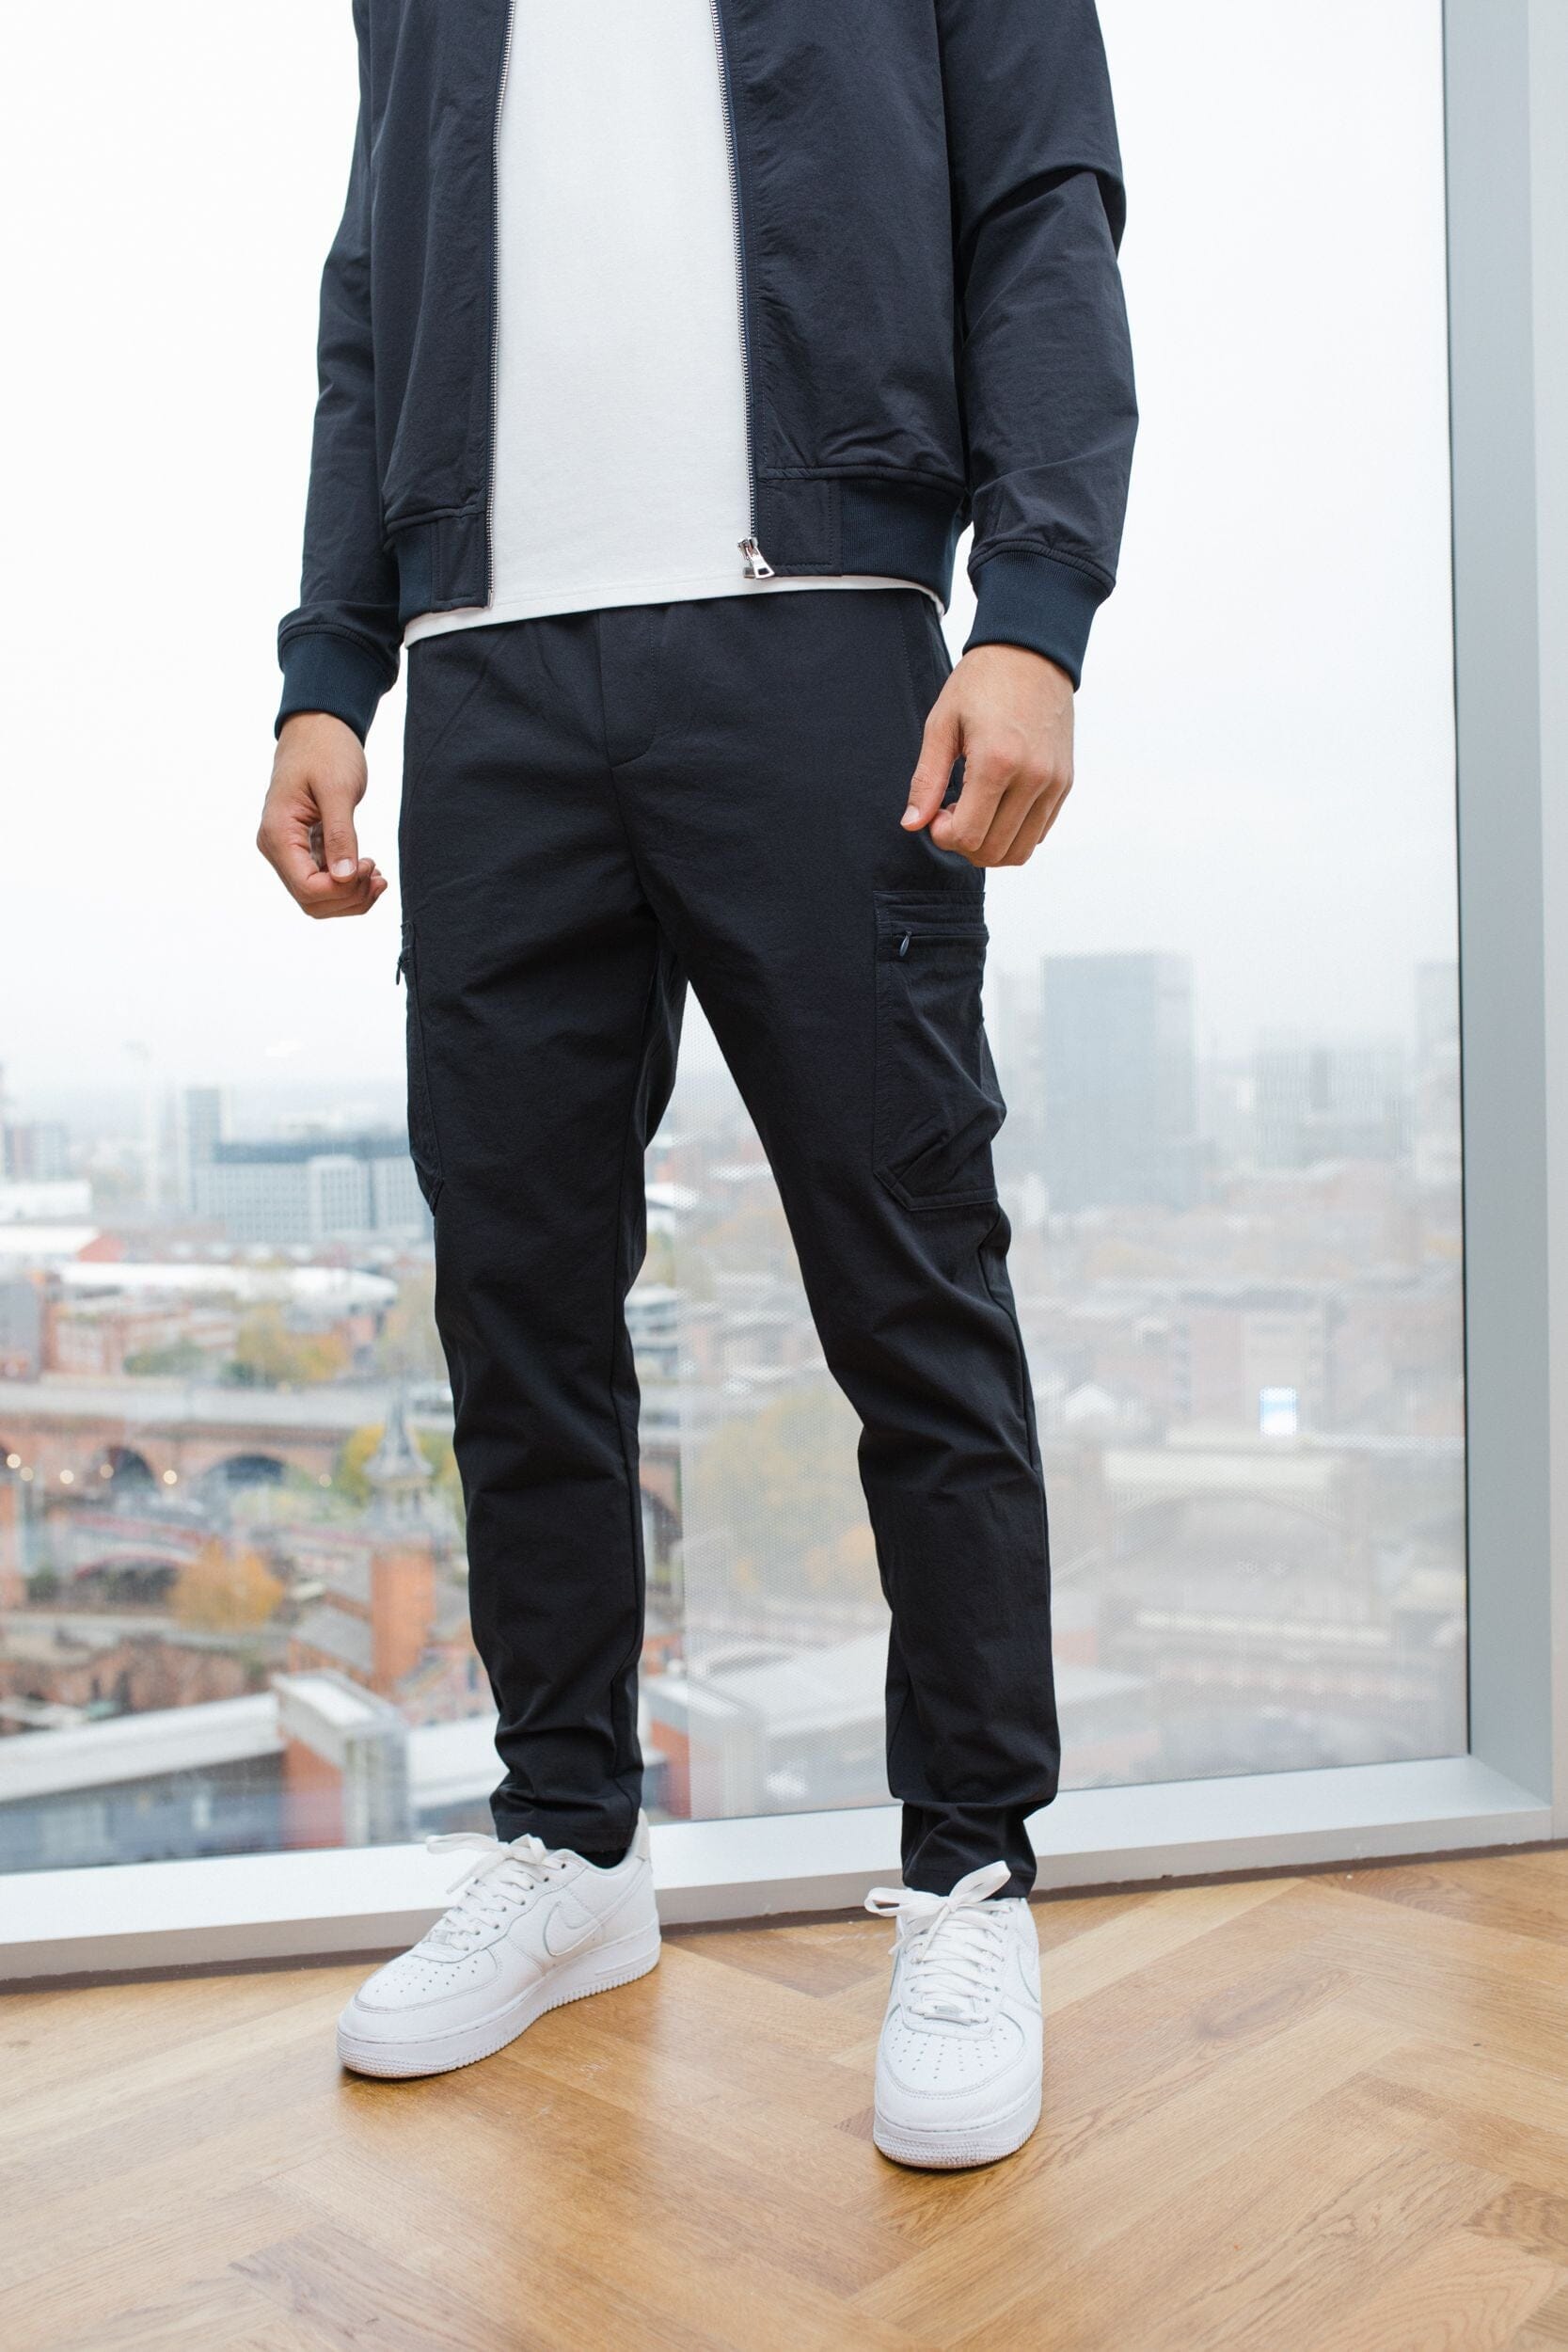 Buy Men's Trousers  How To Choose Pants Based On Style, Fit